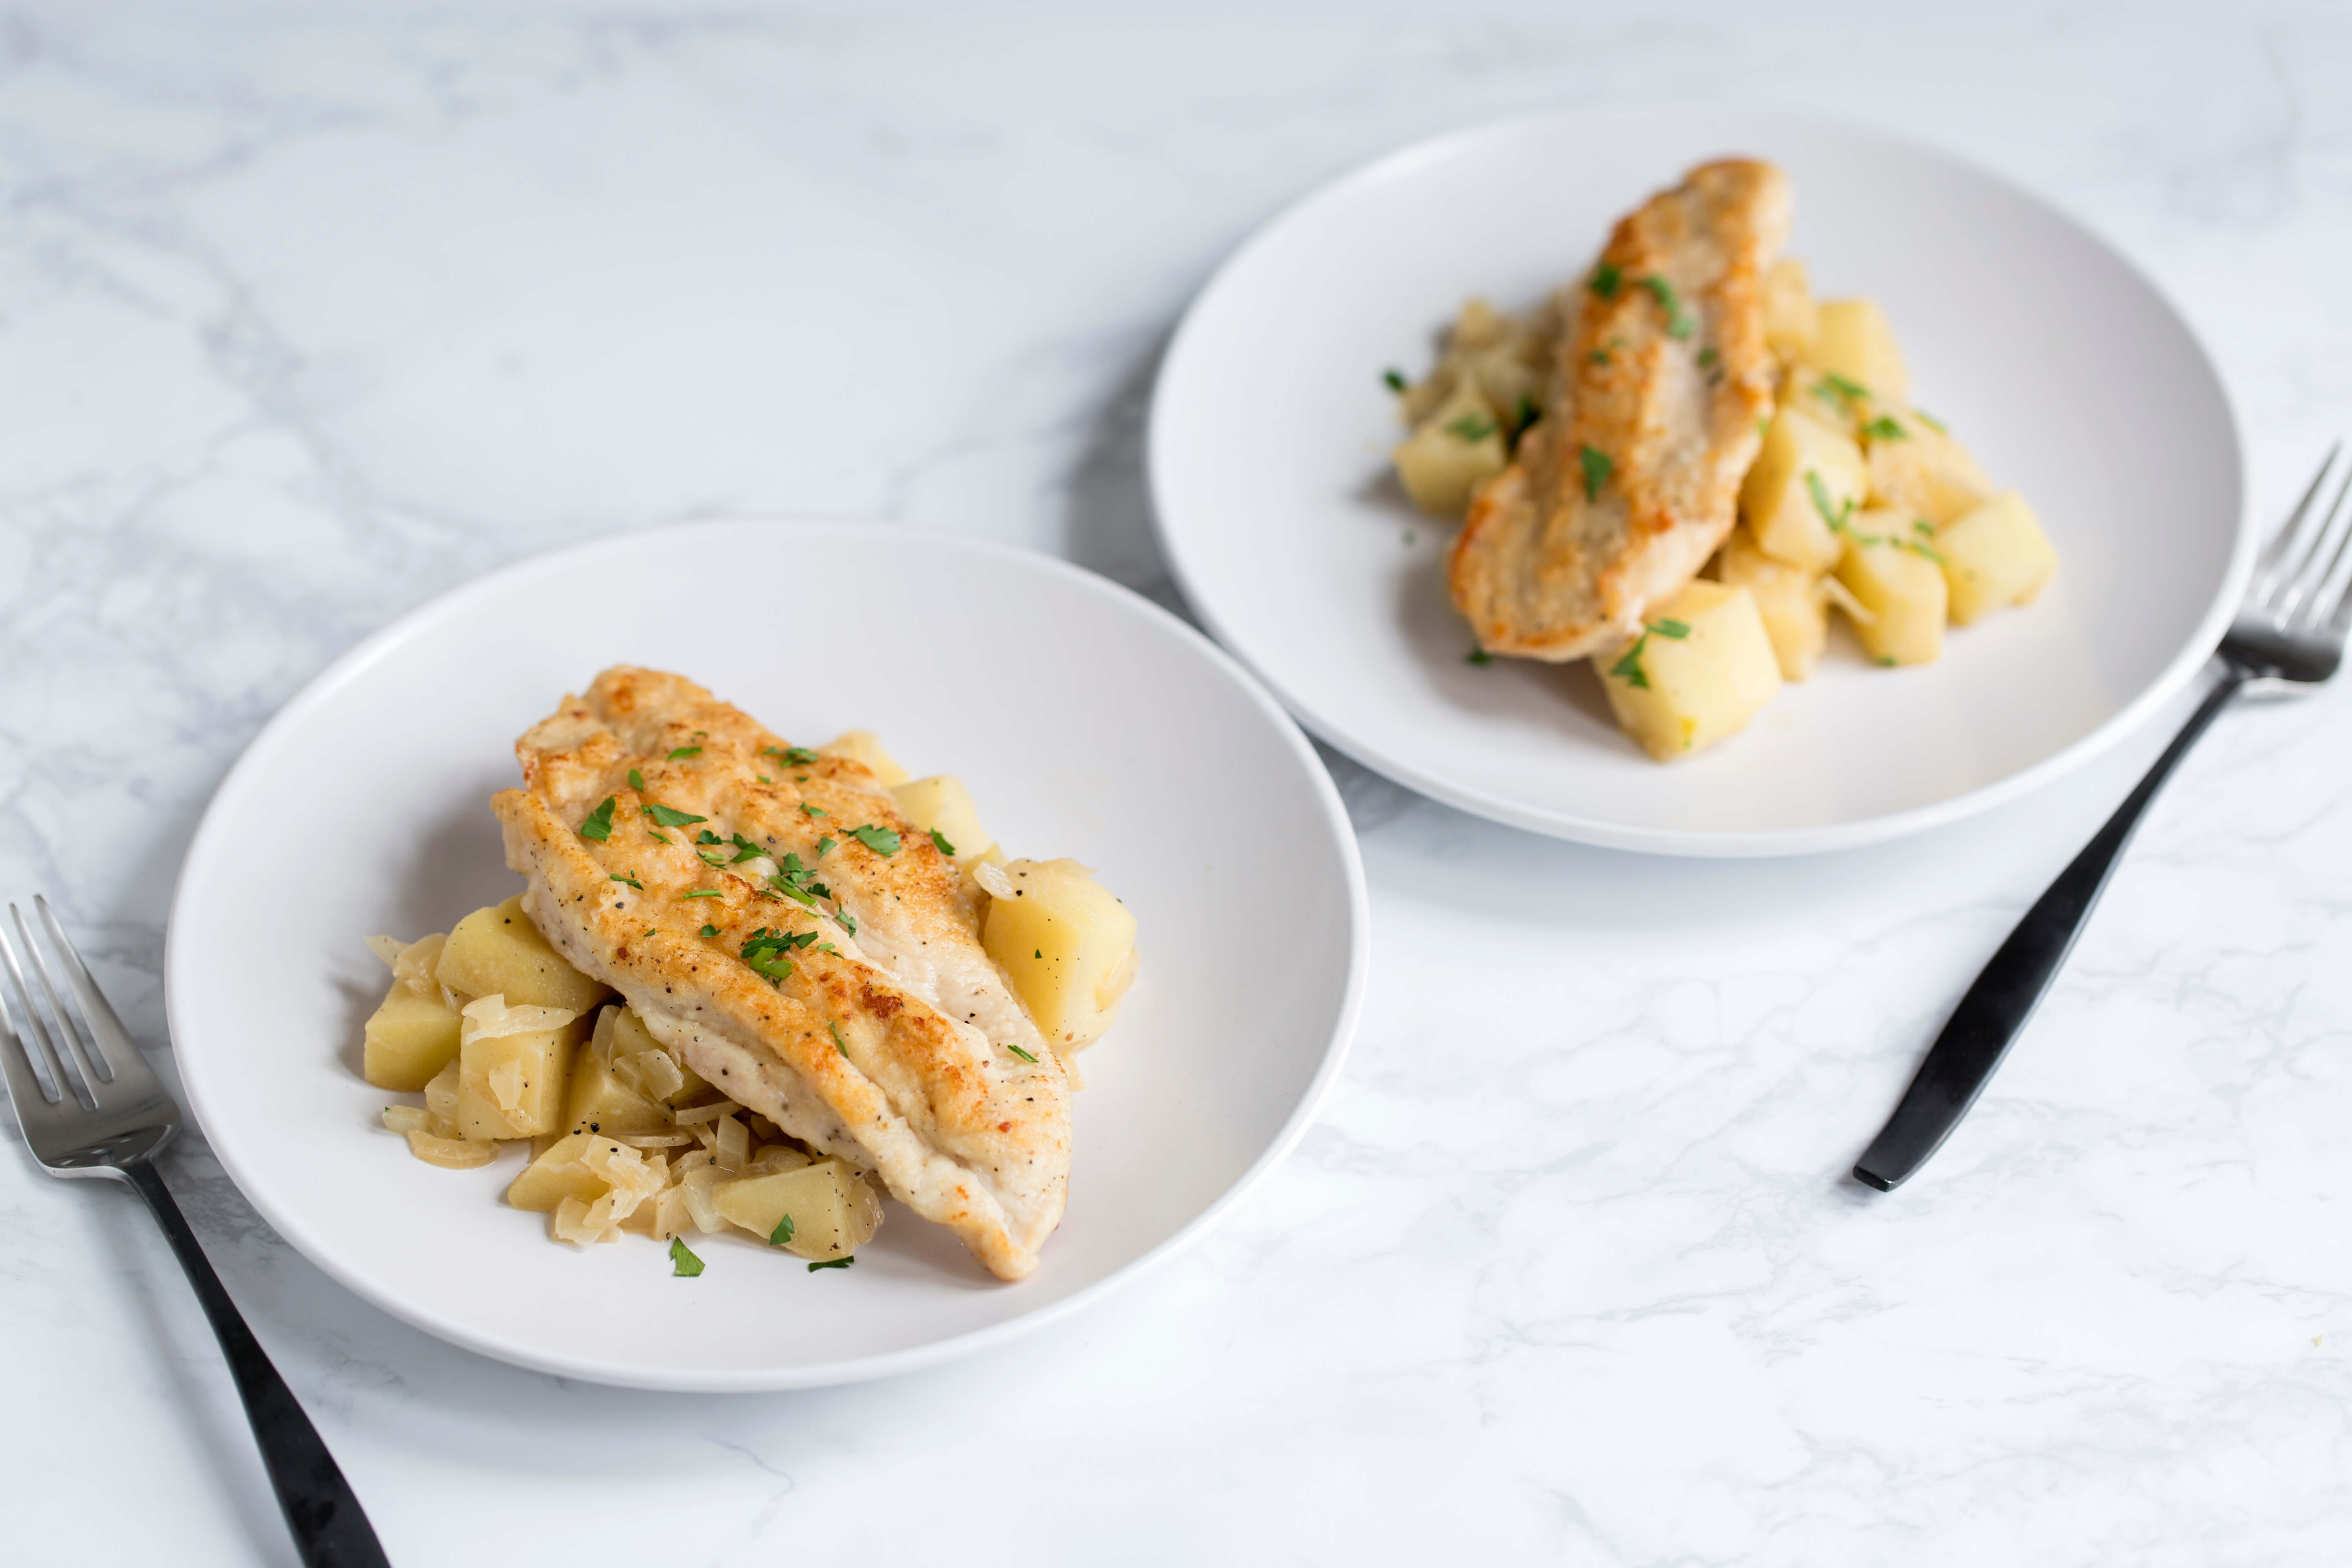 Pan-Seared Chicken with Apples & Onions